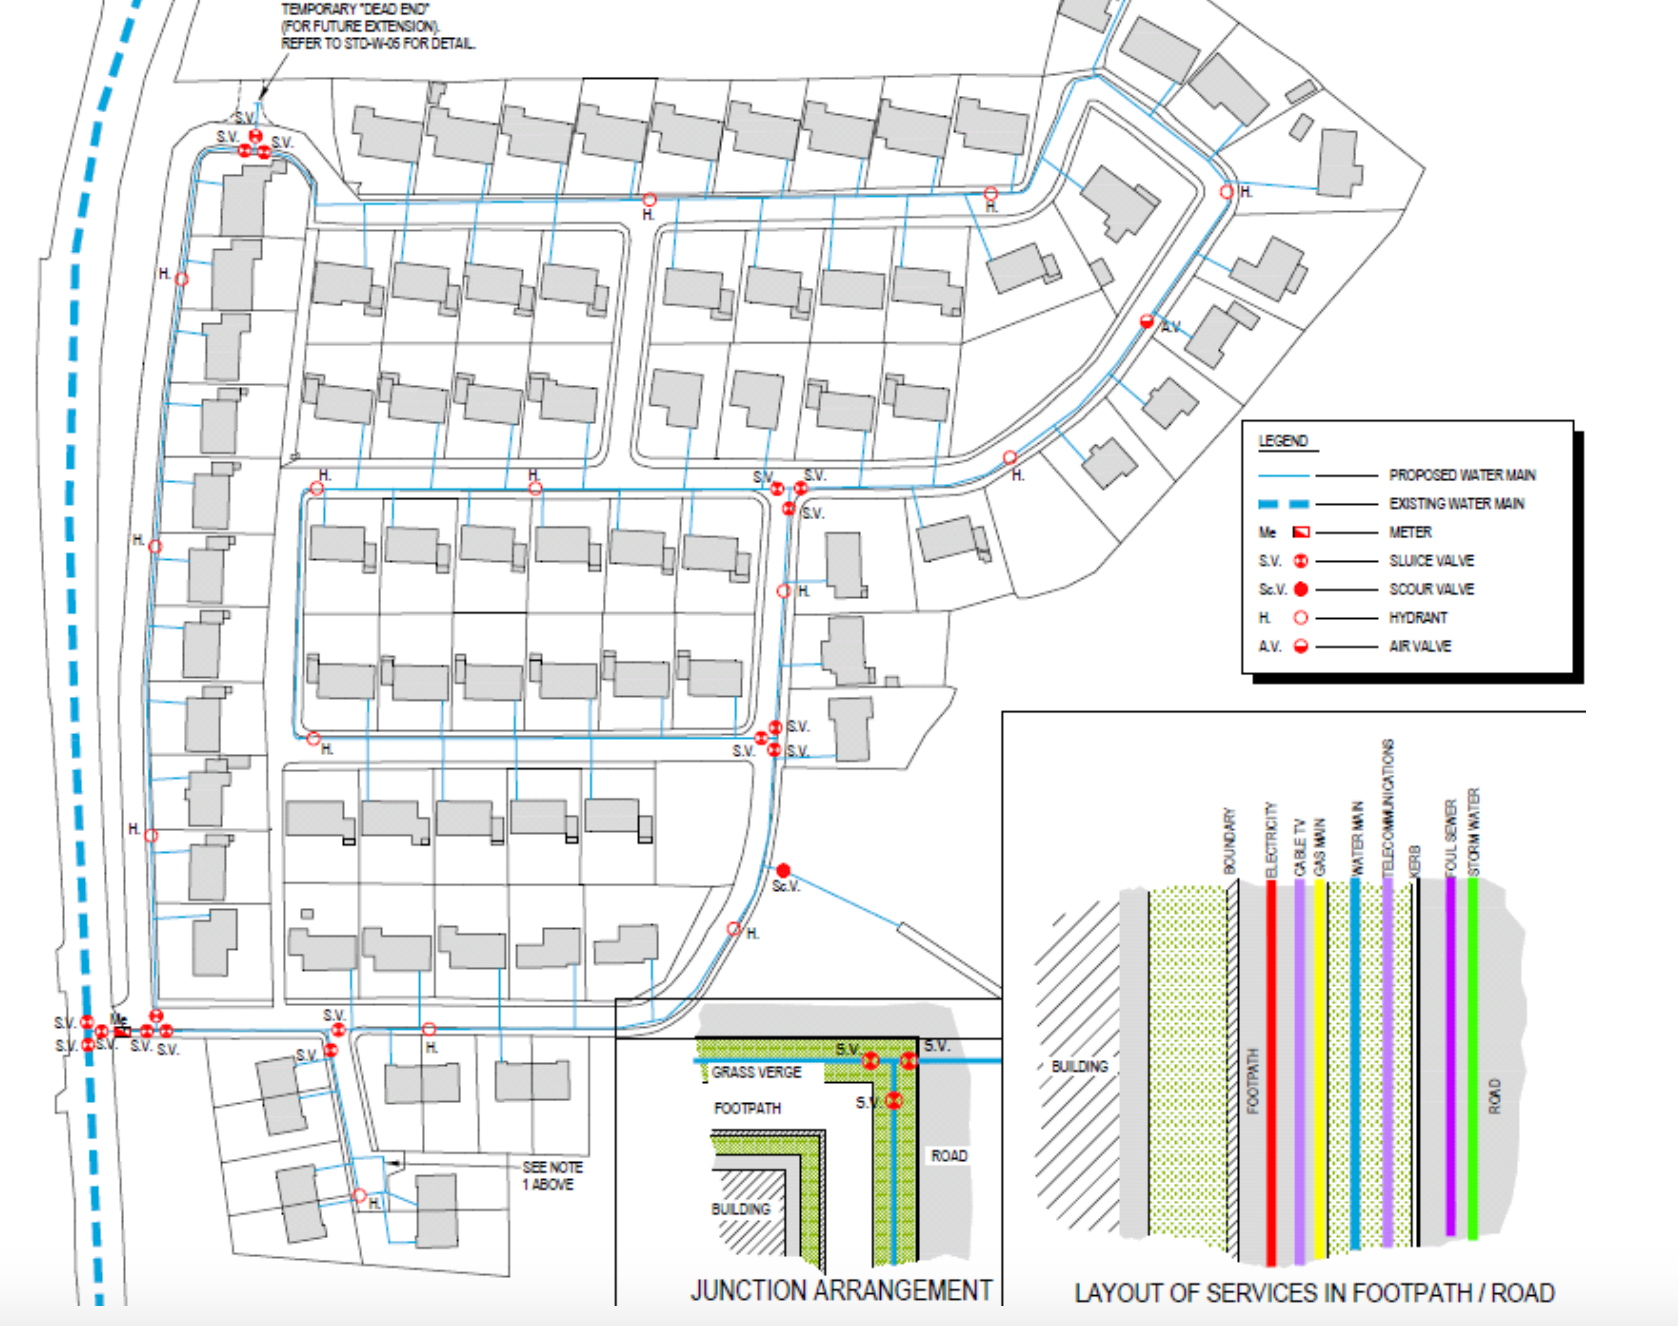 Diagram HIW3 - Typical layout for the water supply to a housing development - Extract from Irish Water